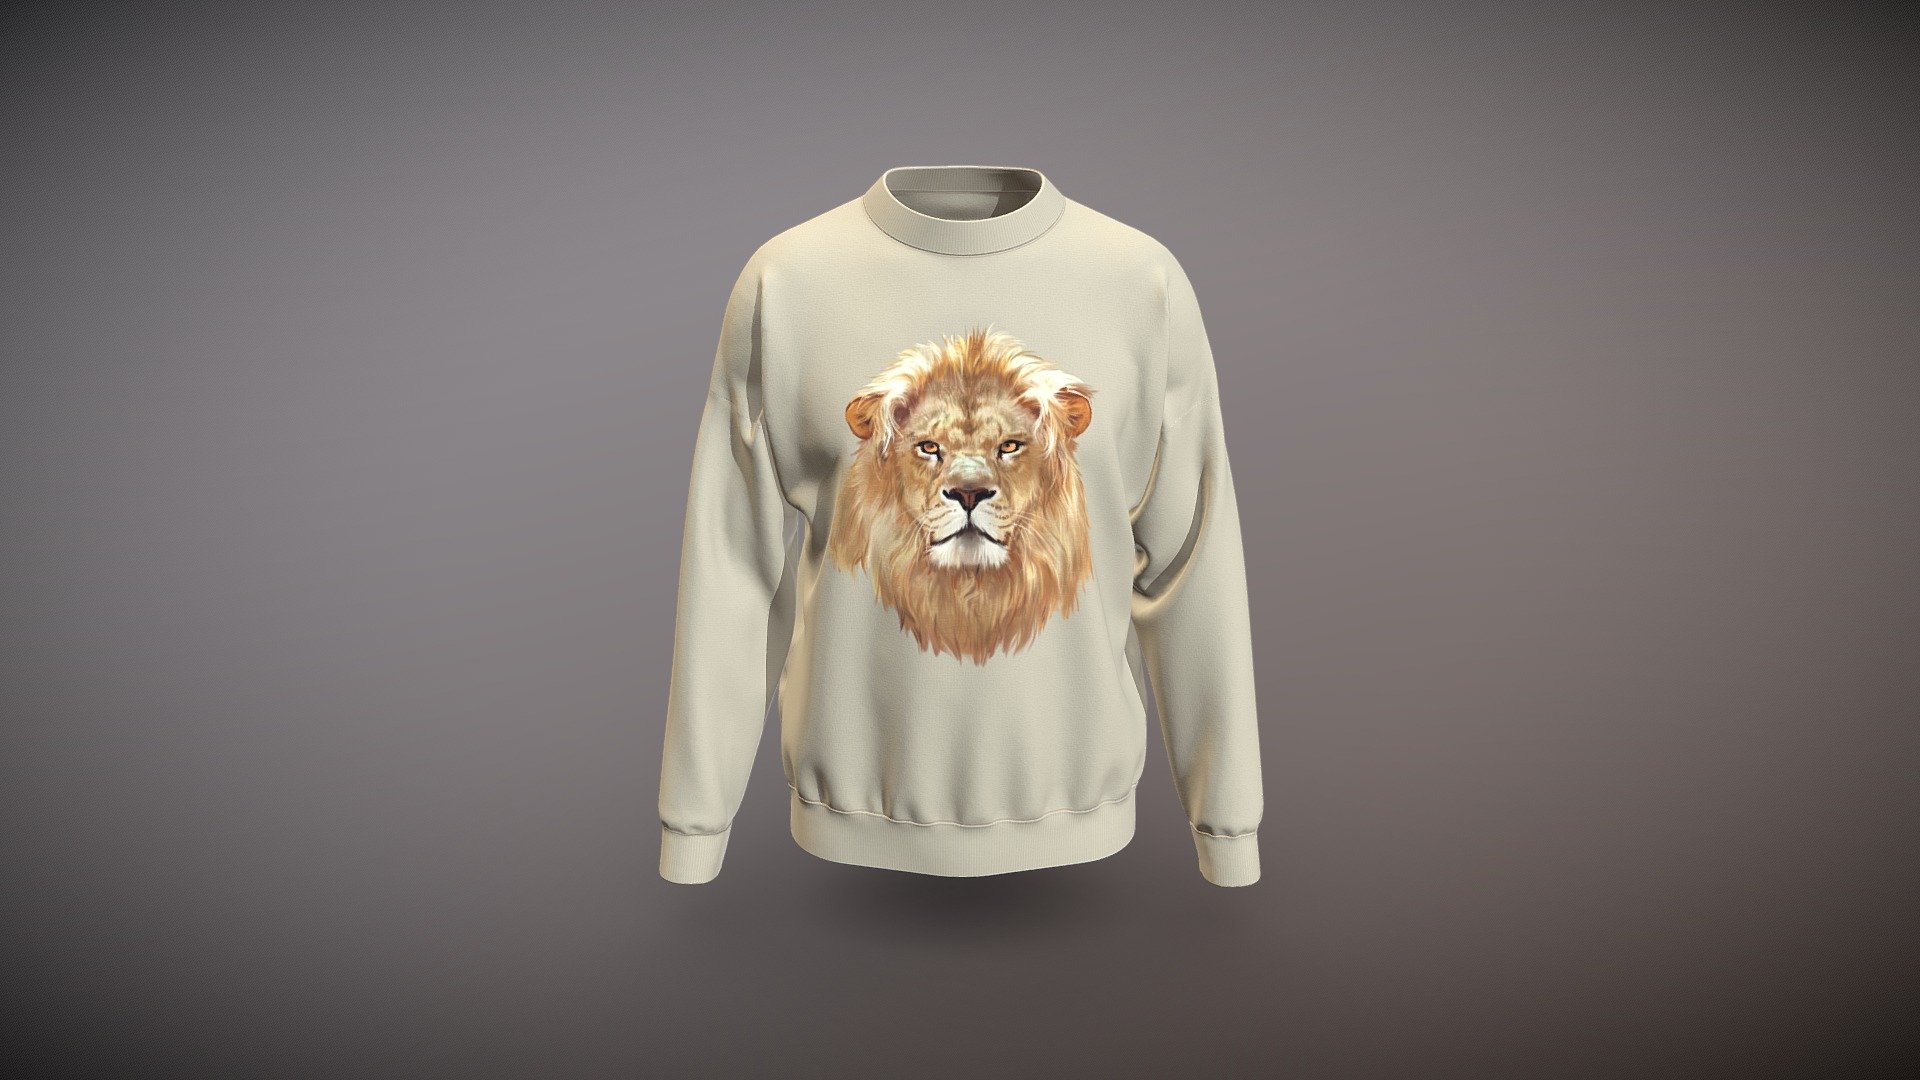 Cloth Title = Lion Print Oversized Drop Shoulder Sweatshirt 

SKU = DG100059

Product Type = Sweatshirt 

Cloth Length = Regular 

Body Fit = Oversized  

Occasion = Outerwear 

Sleeve Style = Drop Shoulder 


Our Services:

3D Apparel Design.

OBJ,FBX,GLTF Making with High/Low Poly.

Fabric Digitalization.

Mockup making.

3D Teck Pack.

Pattern Making.

2D Illustration.

Cloth Animation and 360 Spin Video.


Contact us:- 

Email: info@digitalfashionwear.com 

Website: https://digitalfashionwear.com 

WhatsApp No: +8801759350445 


We designed all the types of cloth specially focused on product visualization, e-commerce, fitting, and production. 

We will design: 

T-shirts 

Polo shirts 

Hoodies 

Sweatshirt 

Jackets 

Shirts 

TankTops 

Trousers 

Bras 

Underwear 

Blazer 

Aprons 

Leggings 

and All Fashion items. 




Our goal is to make sure what we provide you, meets your demand 3d model